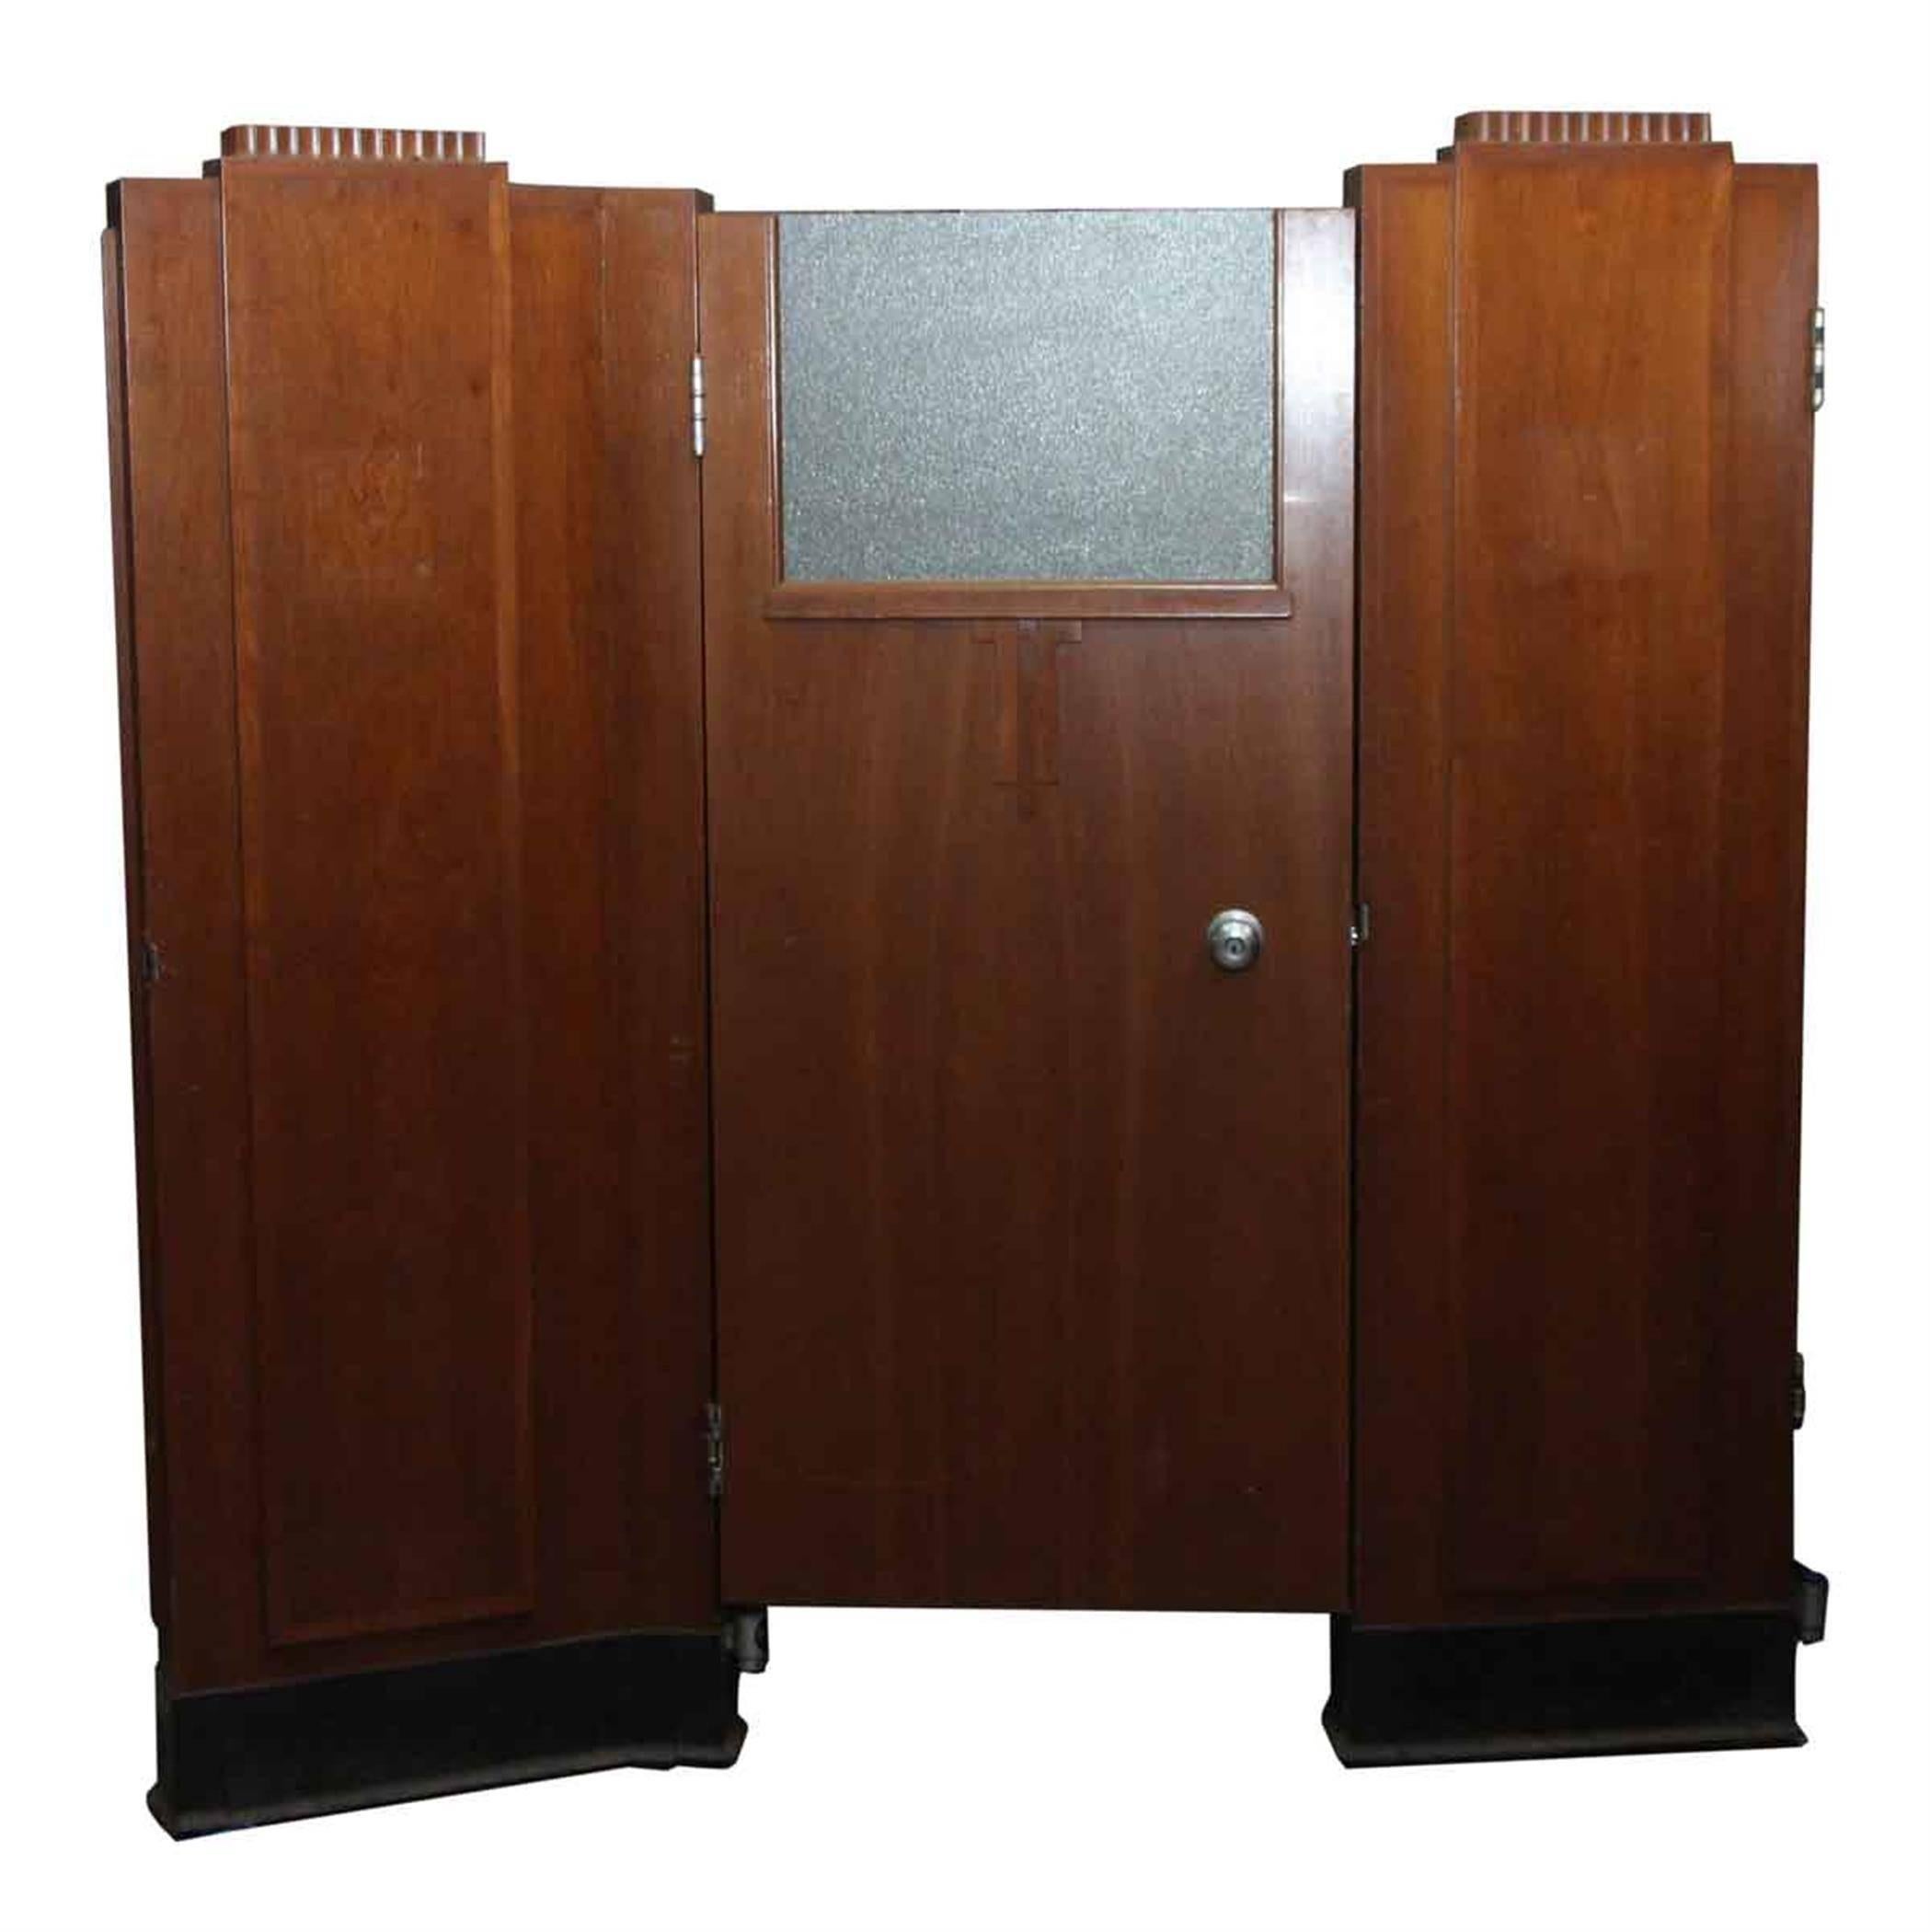 Entire set of divided Art Deco bank cubicles with glass and walnut veneer from the 1940s. This set consists of ten connected rooms like the one pictured. Priced as one lot, but we will consider separating. This can be seen at our 400 Gilligan St